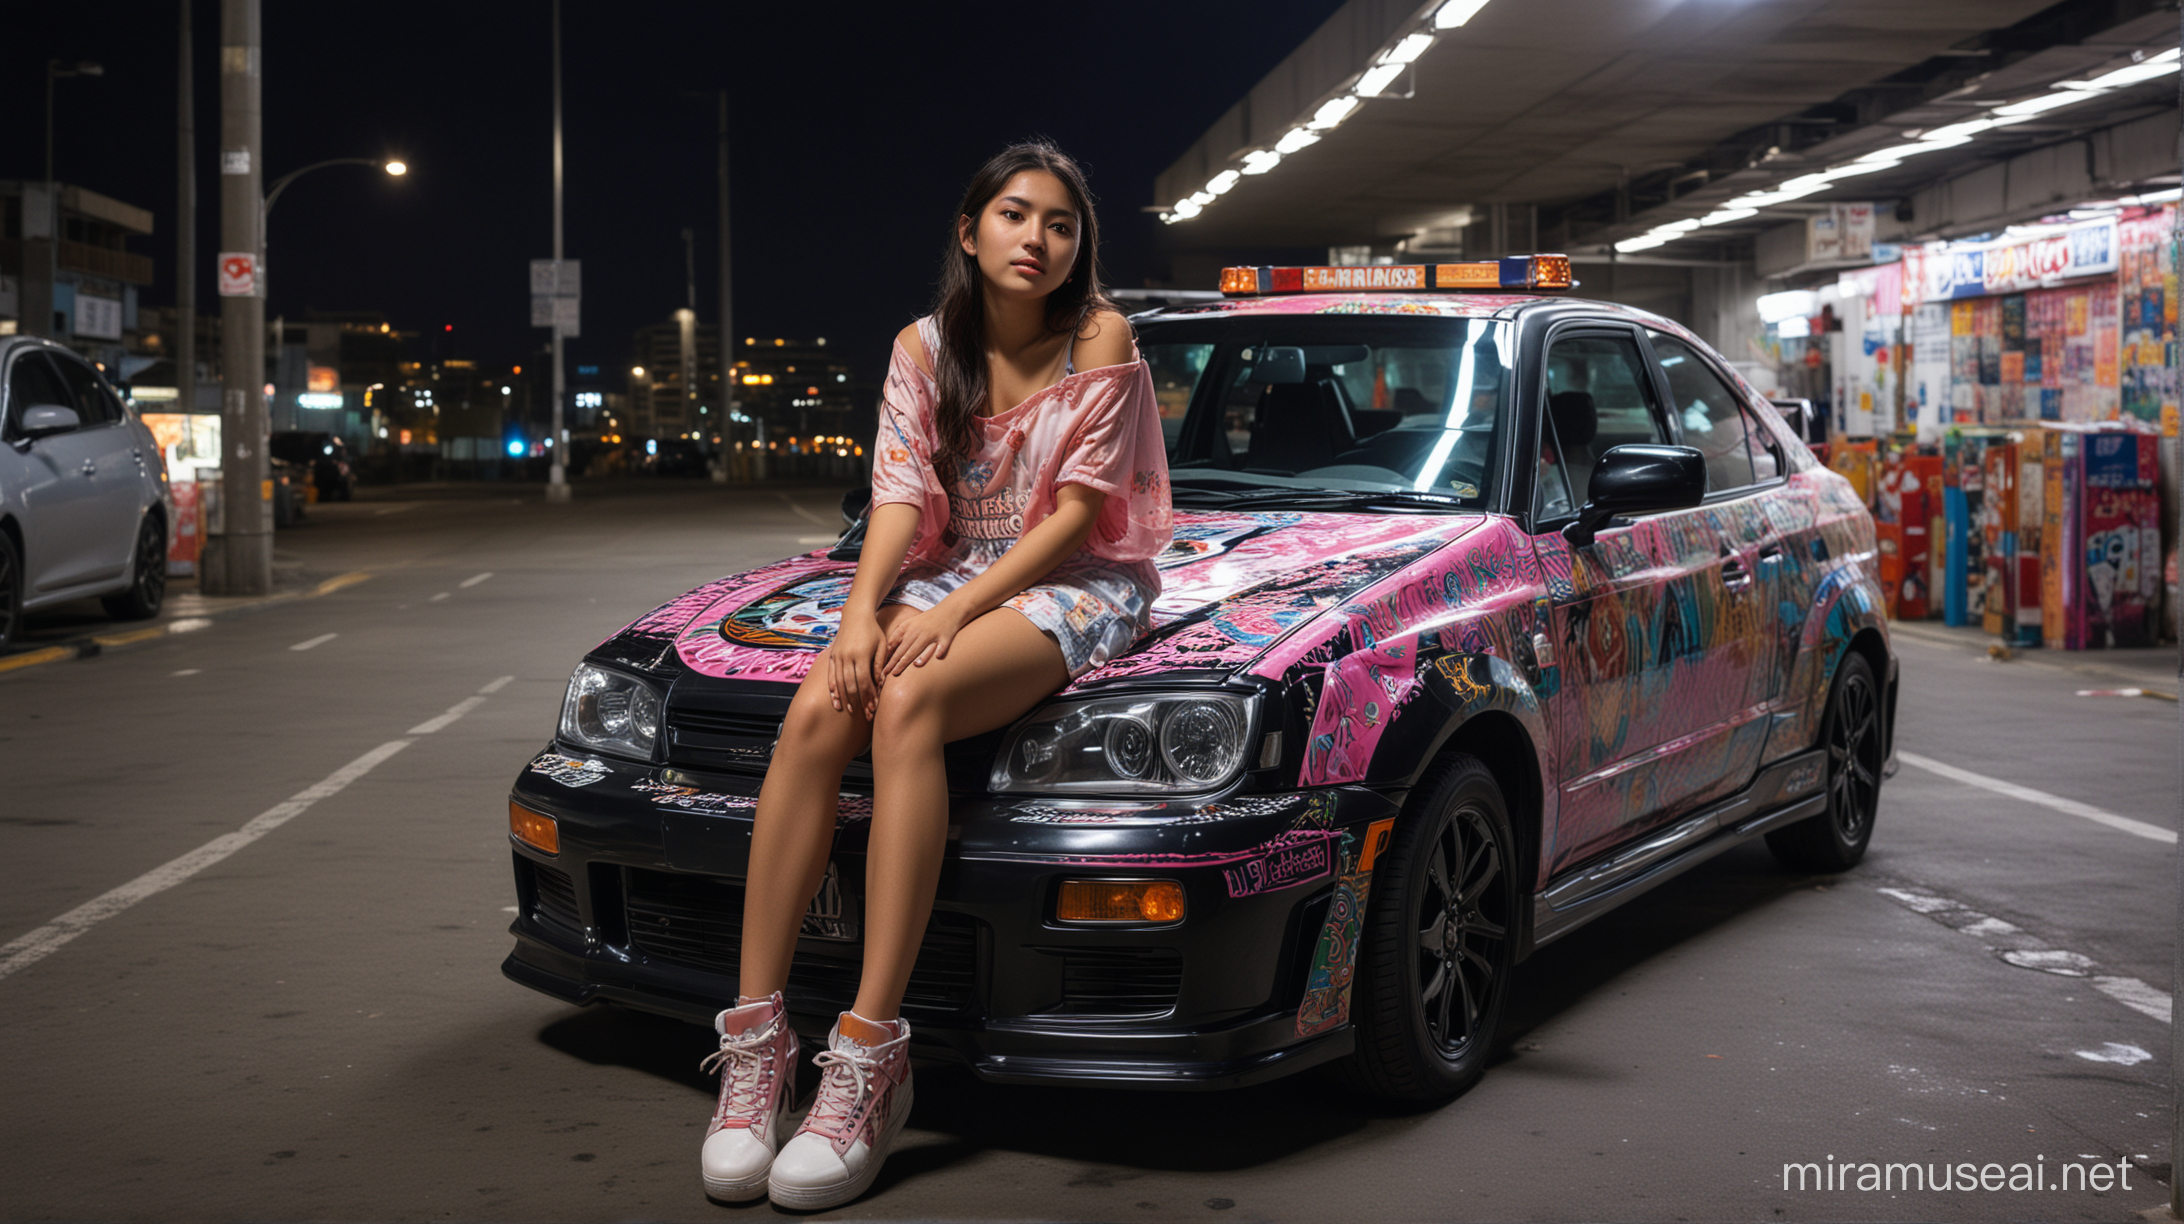 Mexican Girl Sitting on ItashaStyle Car in NeonLit Underground Parking Lot at Night